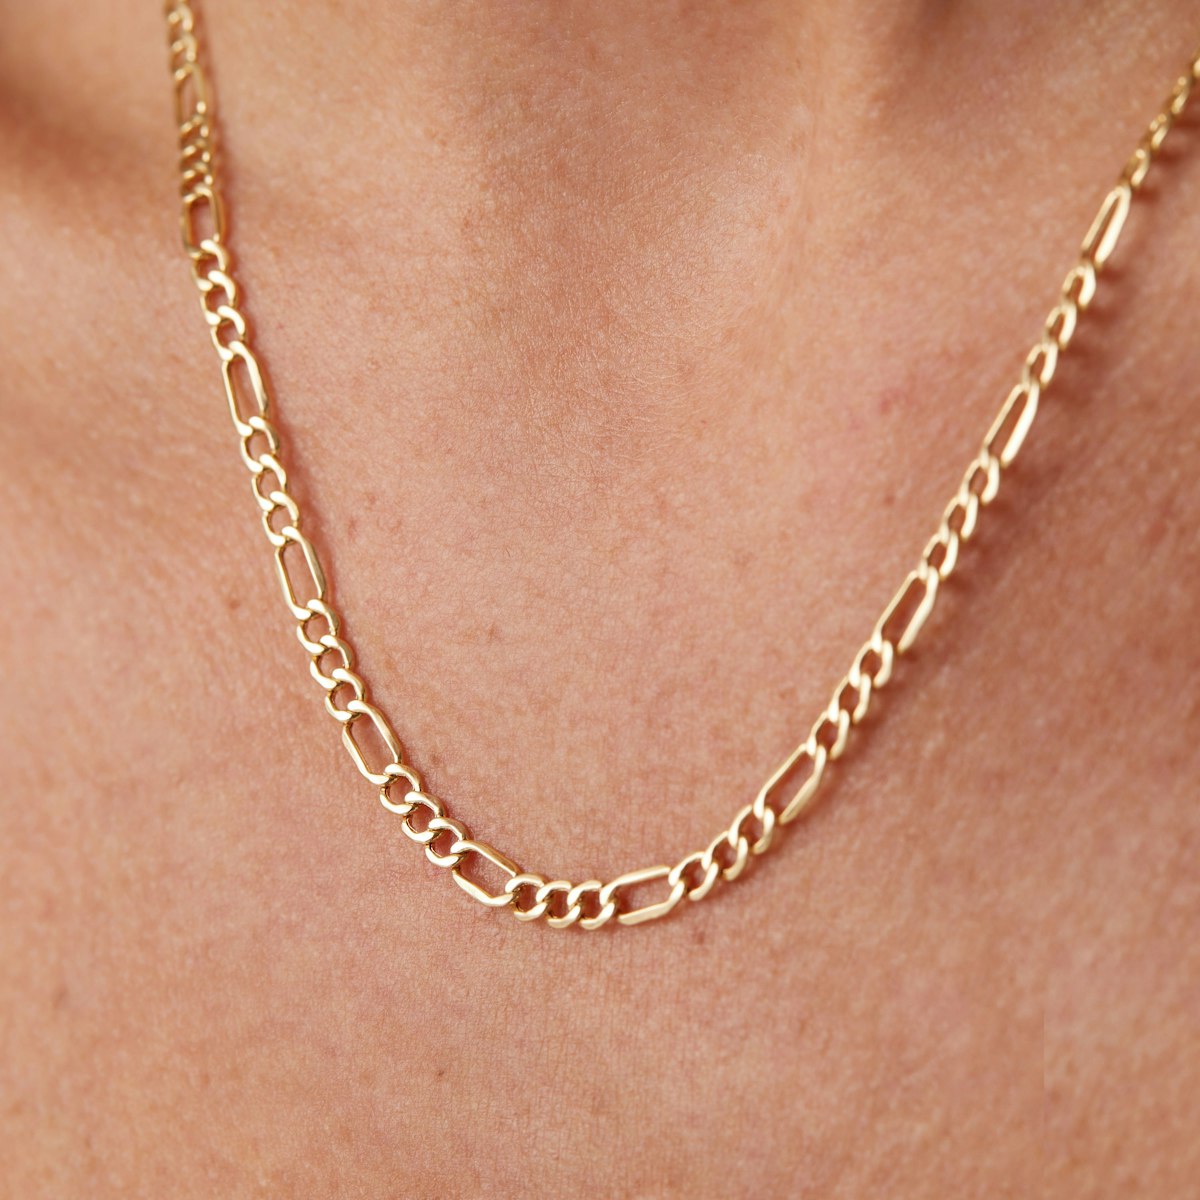 14K Gold Figaro Chain Necklace - 16__A_0433.jpeg